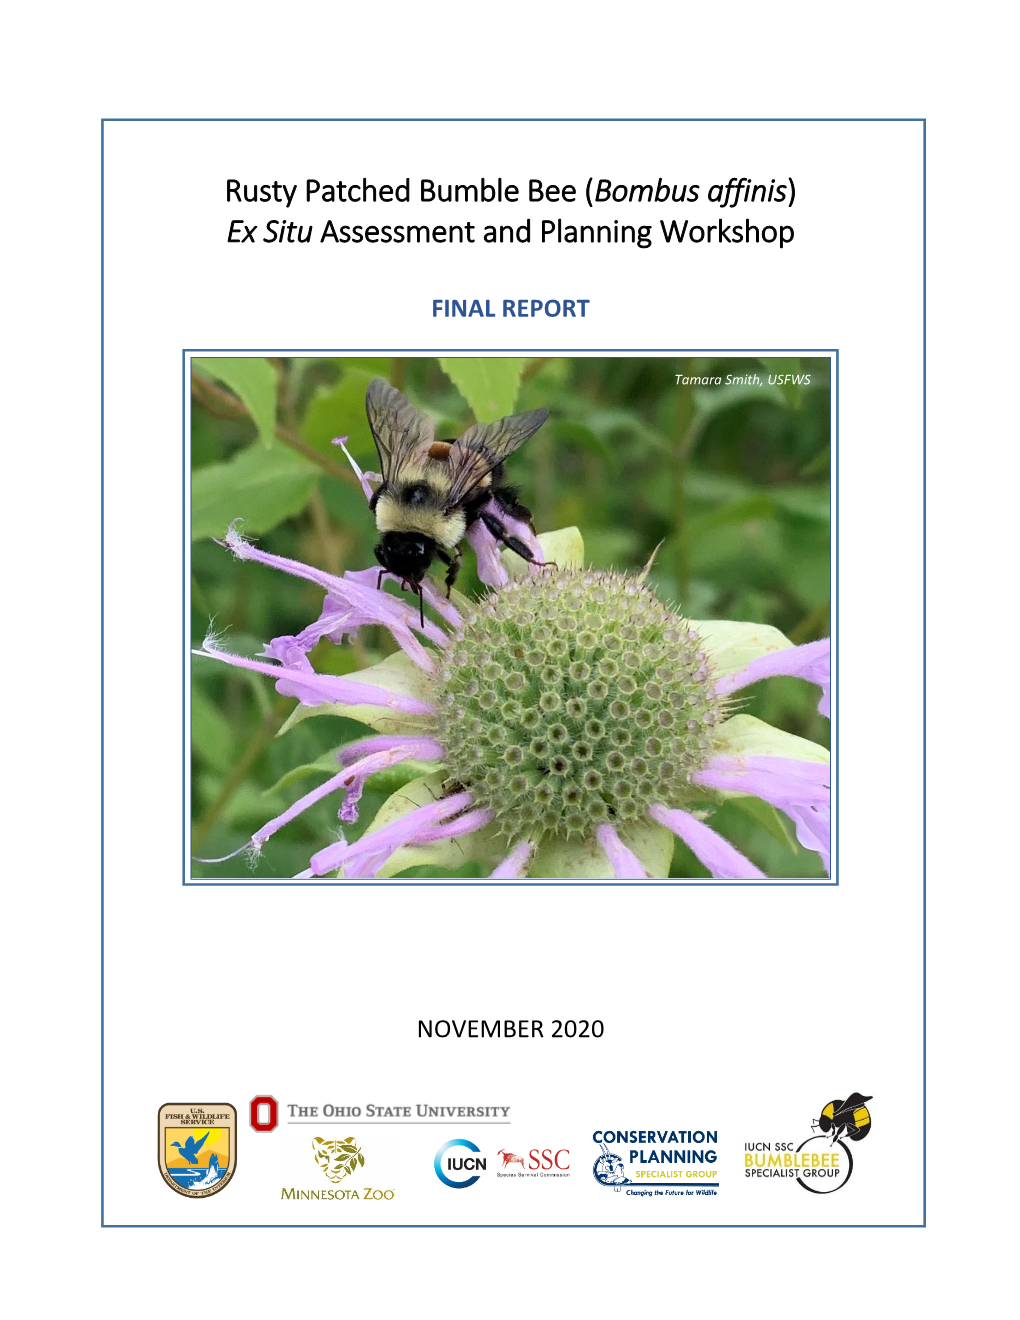 Rusty Patched Bumble Bee (Bombus Affinis) Ex Situ Assessment and Planning Workshop